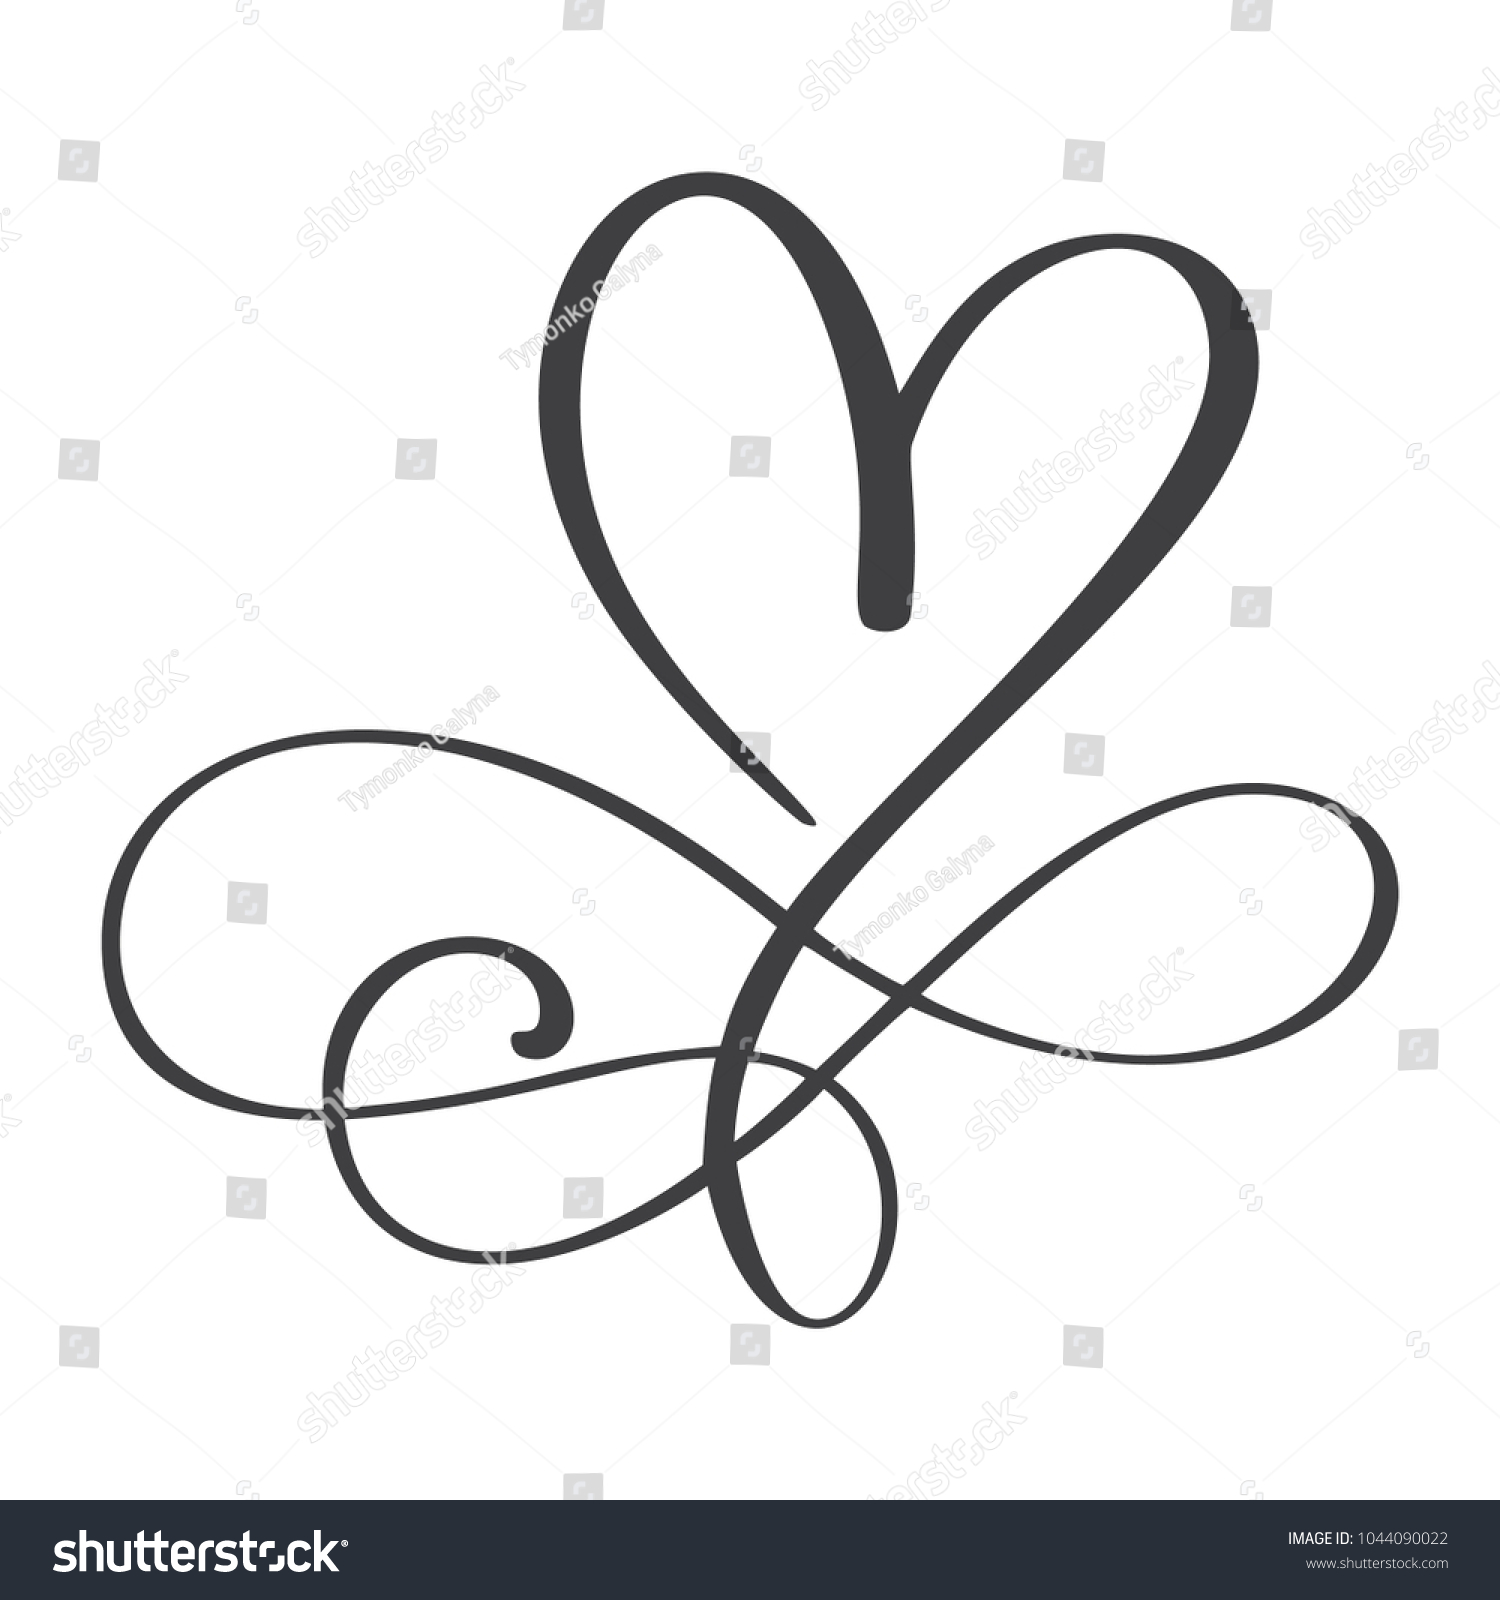 Heart Love Sign Forever Infinity Romantic Stock Vector (Royalty Free ...